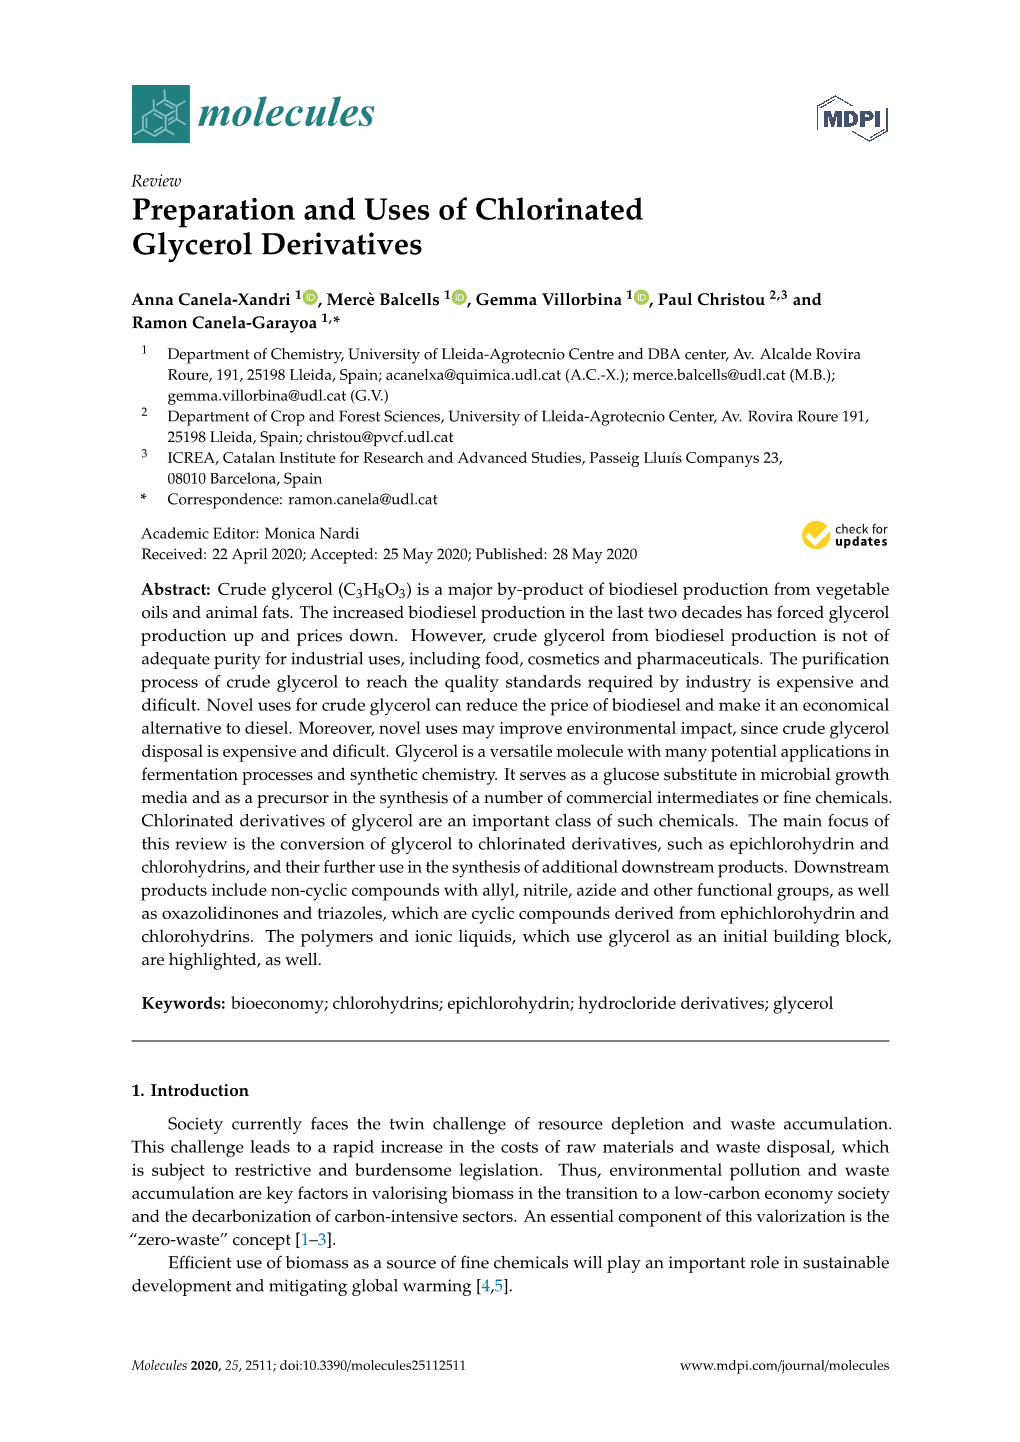 Preparation and Uses of Chlorinated Glycerol Derivatives